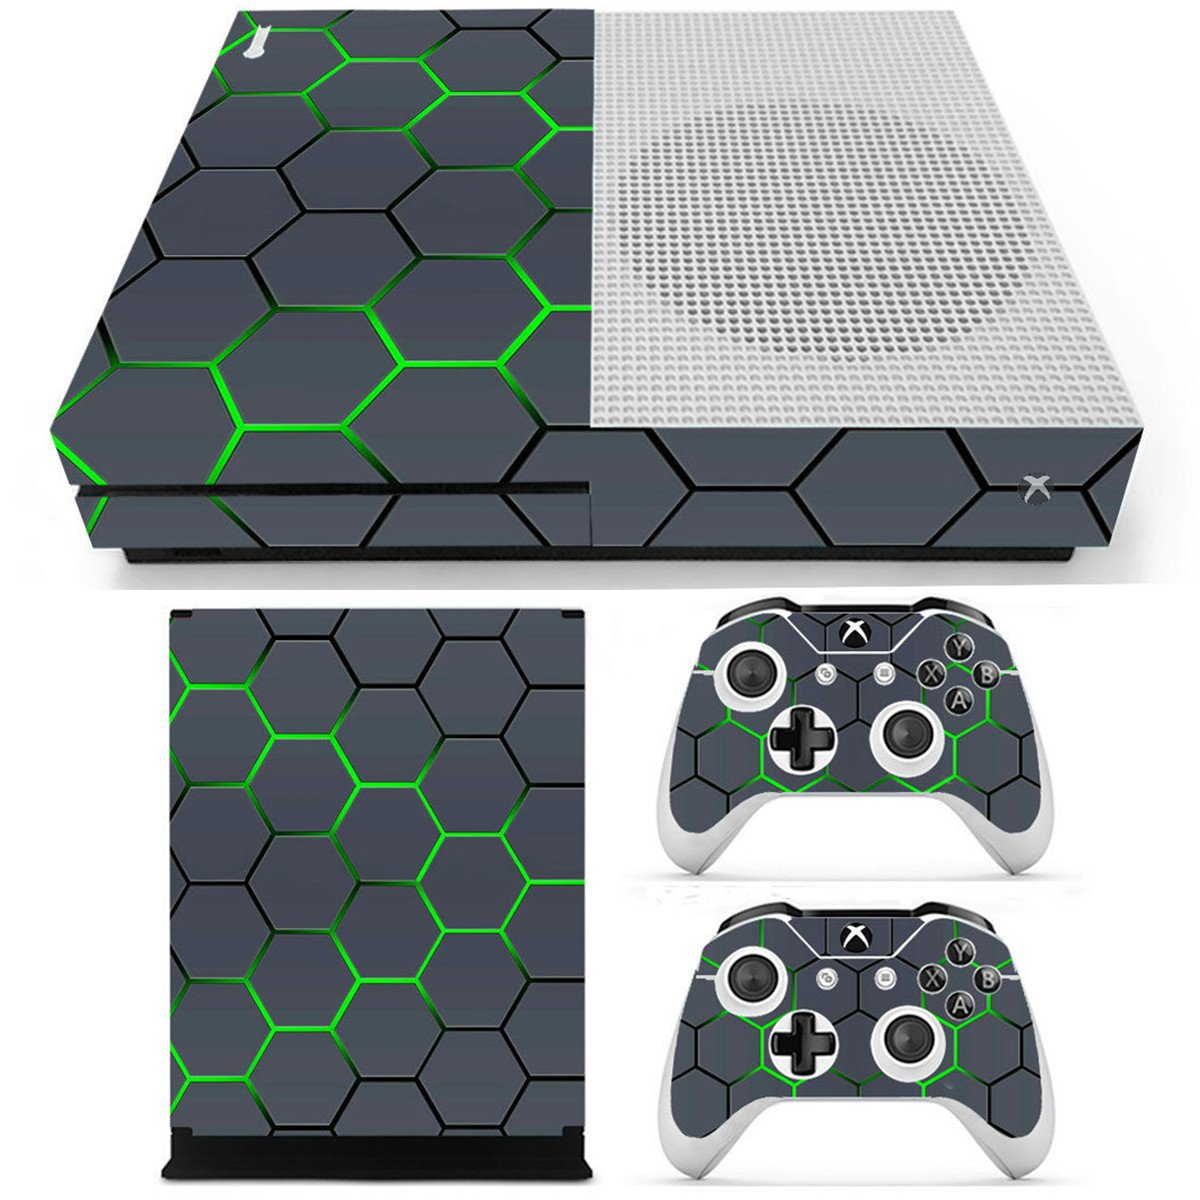 Green Grid Vinyl Decal Skin Stickers Cover for Xbox One S Game Console&2 Controllers 2